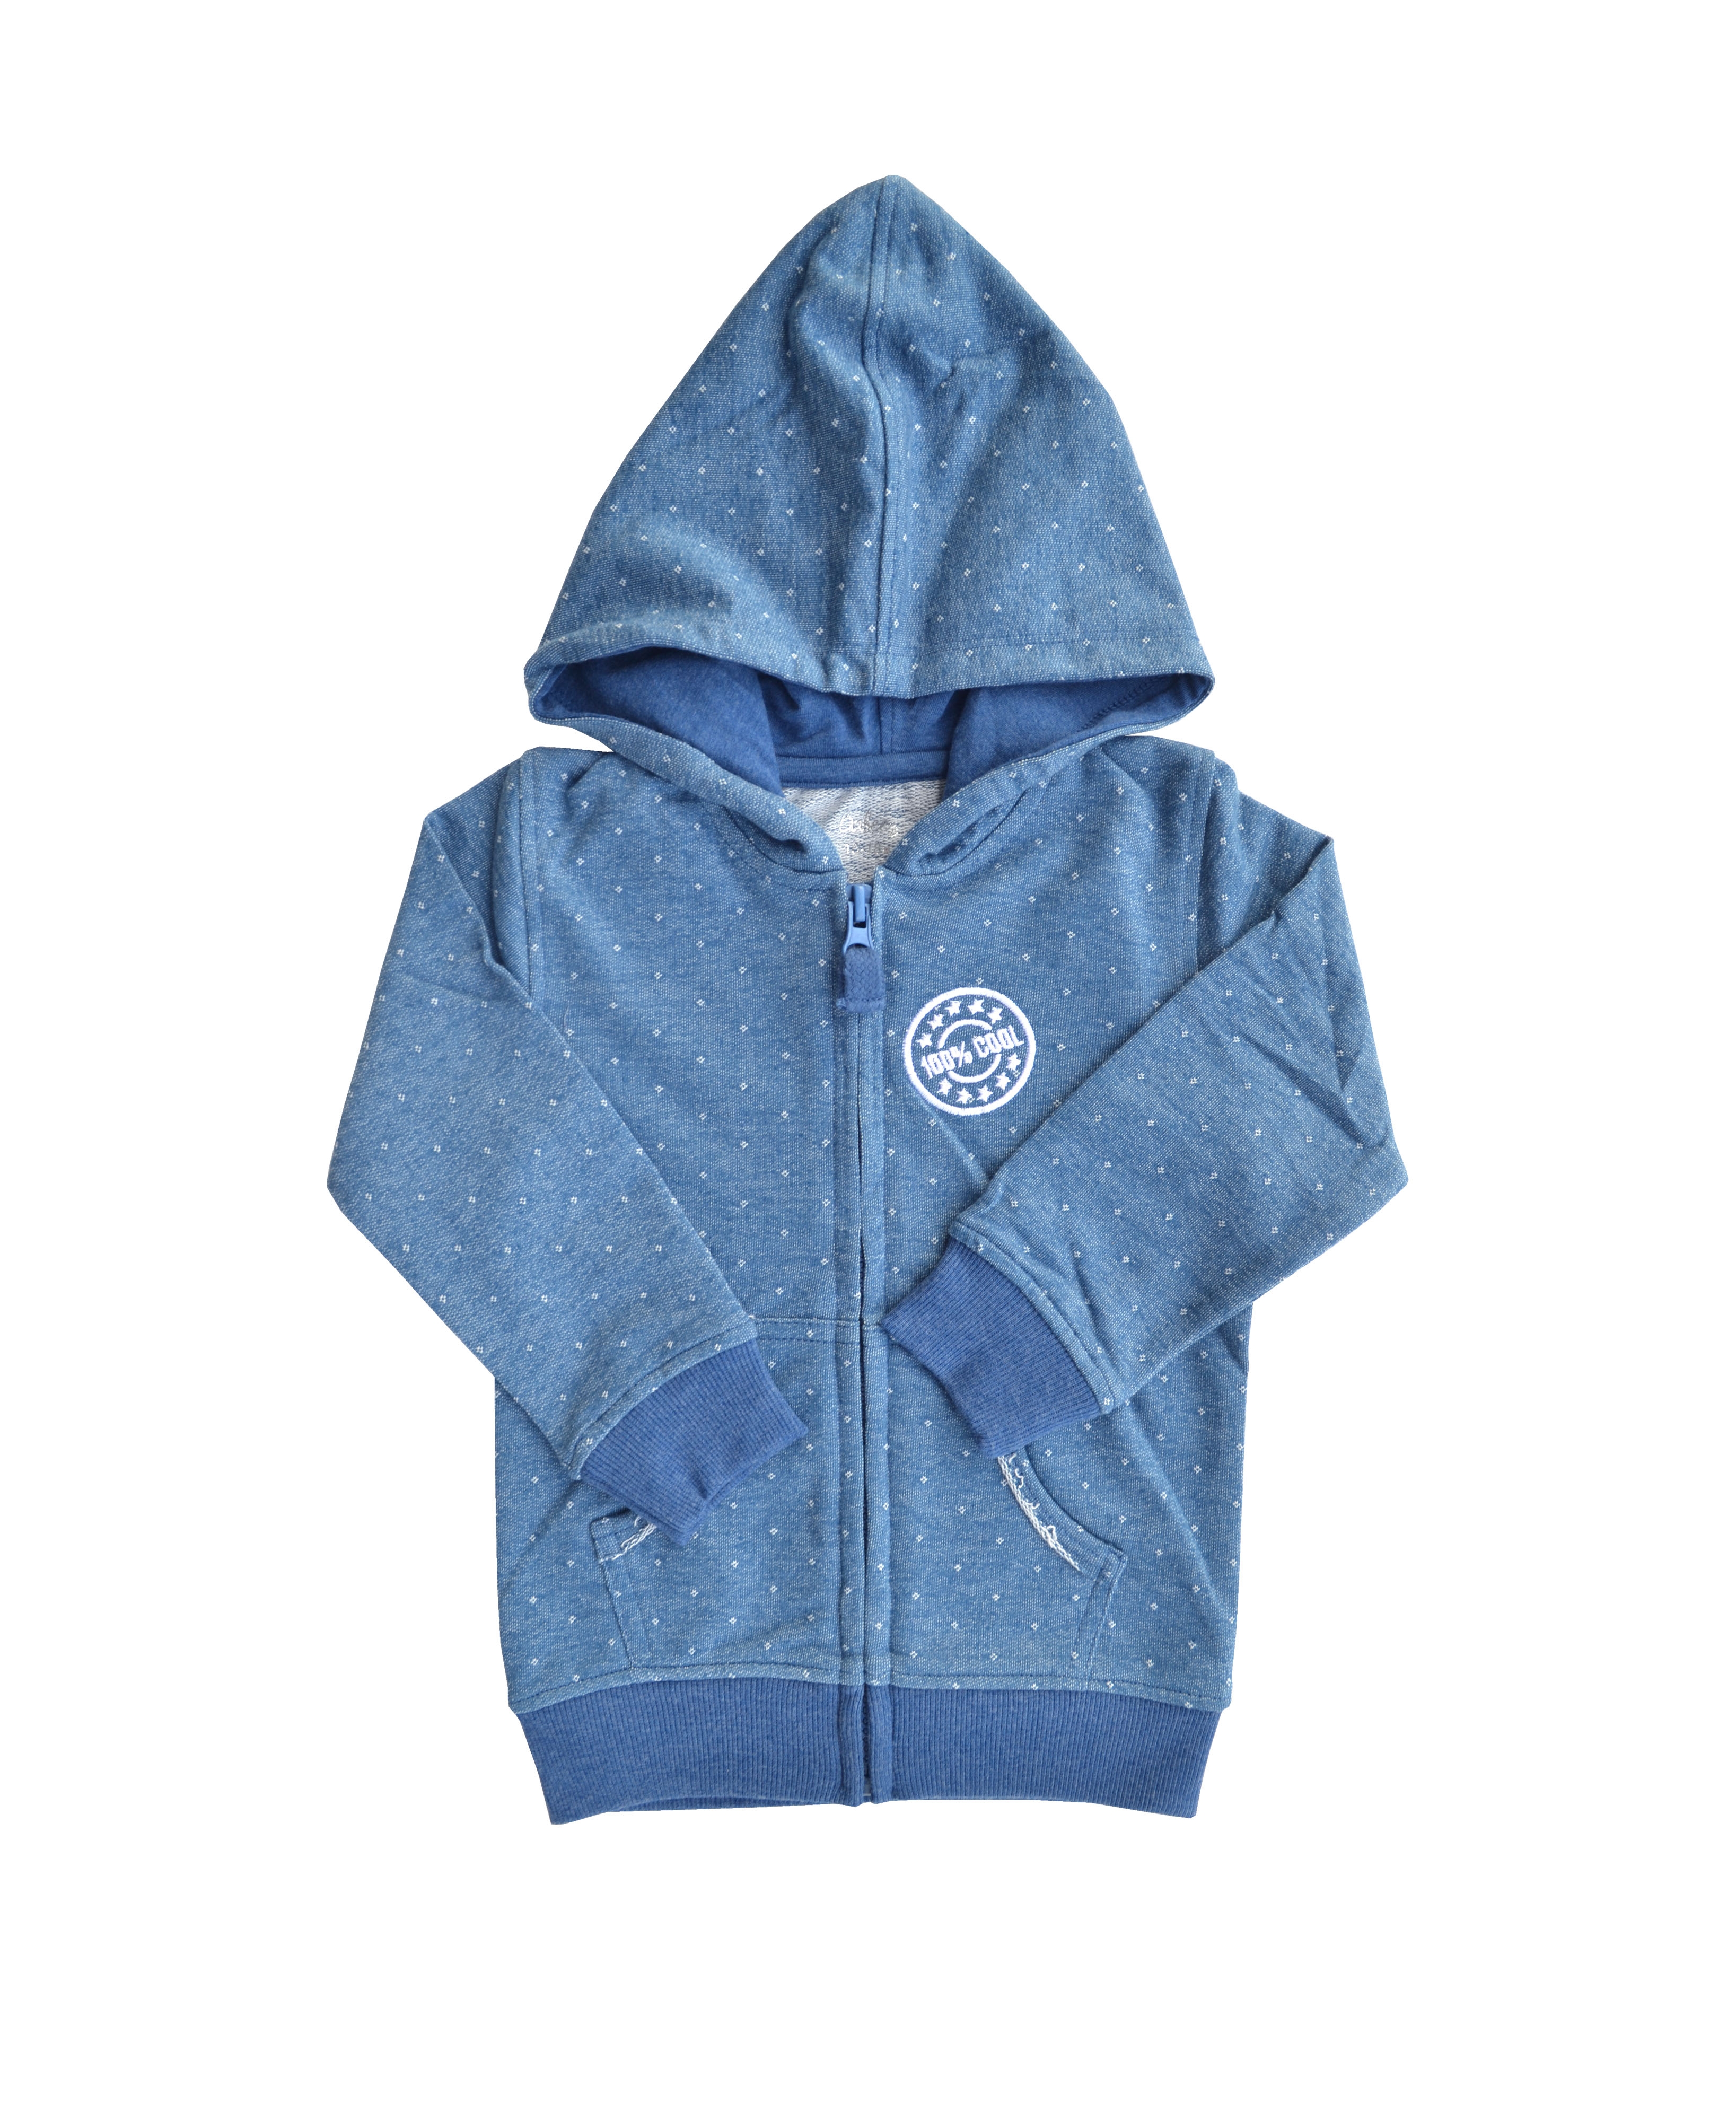 Babeez | Allover Dot Print on Denim Look Long Sleeves Hoody Sweatshirt/Jacket (French Terry) undefined